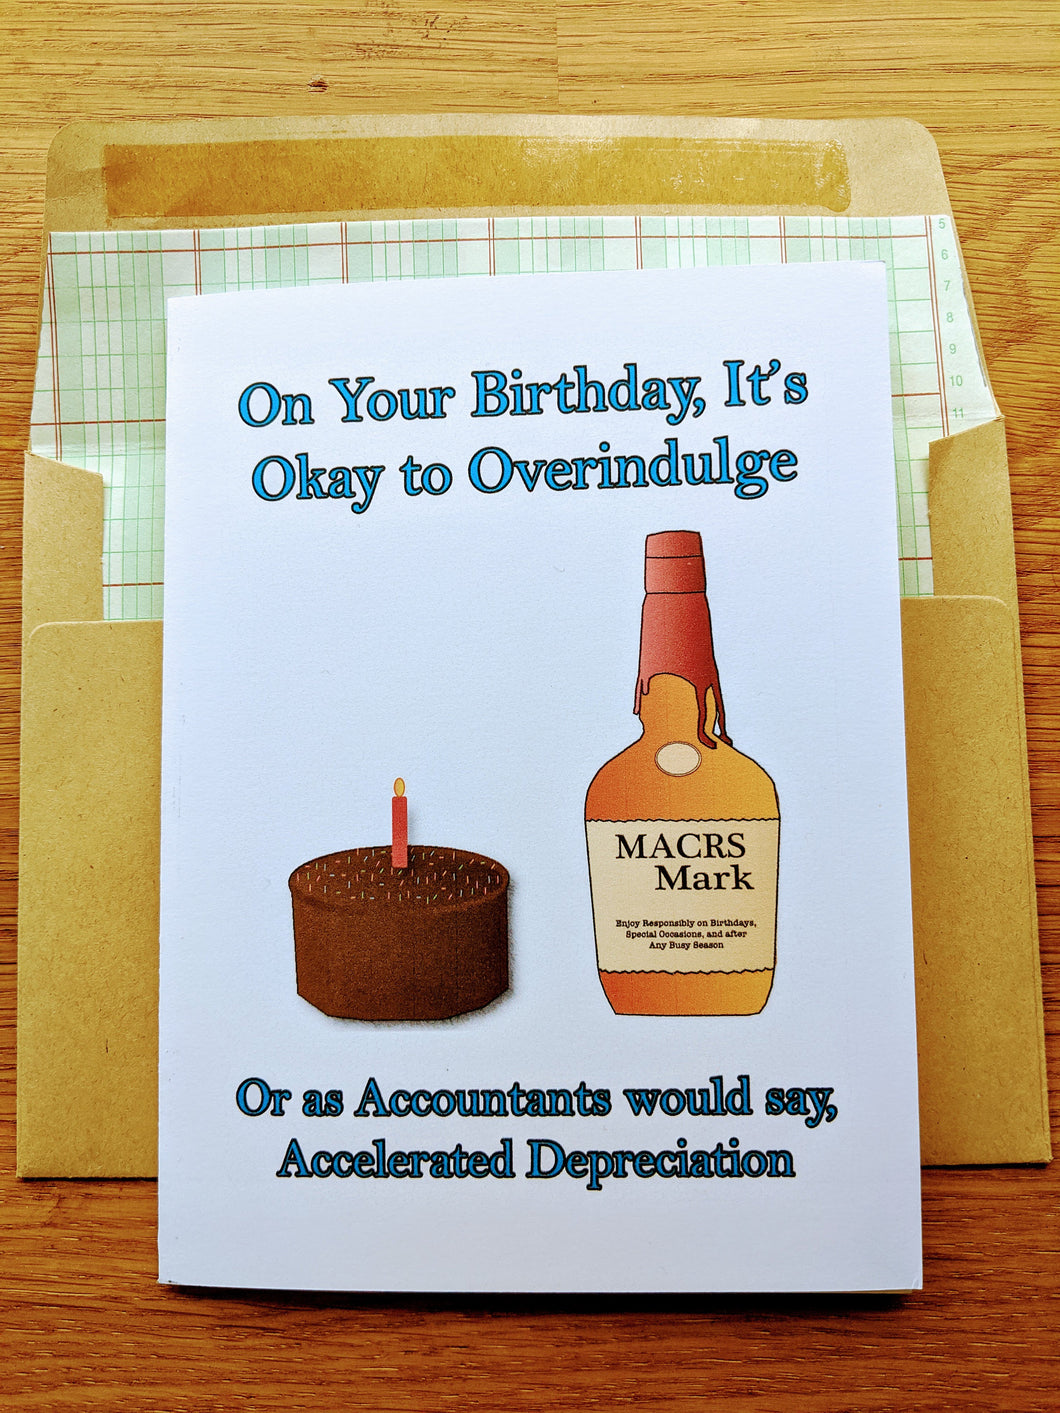 Accounting greeting card, with a birthday cake and a bottle labeled MACRS Mark that parodies a bottle of Makers Mark, atop an envelope lined in ledger paper